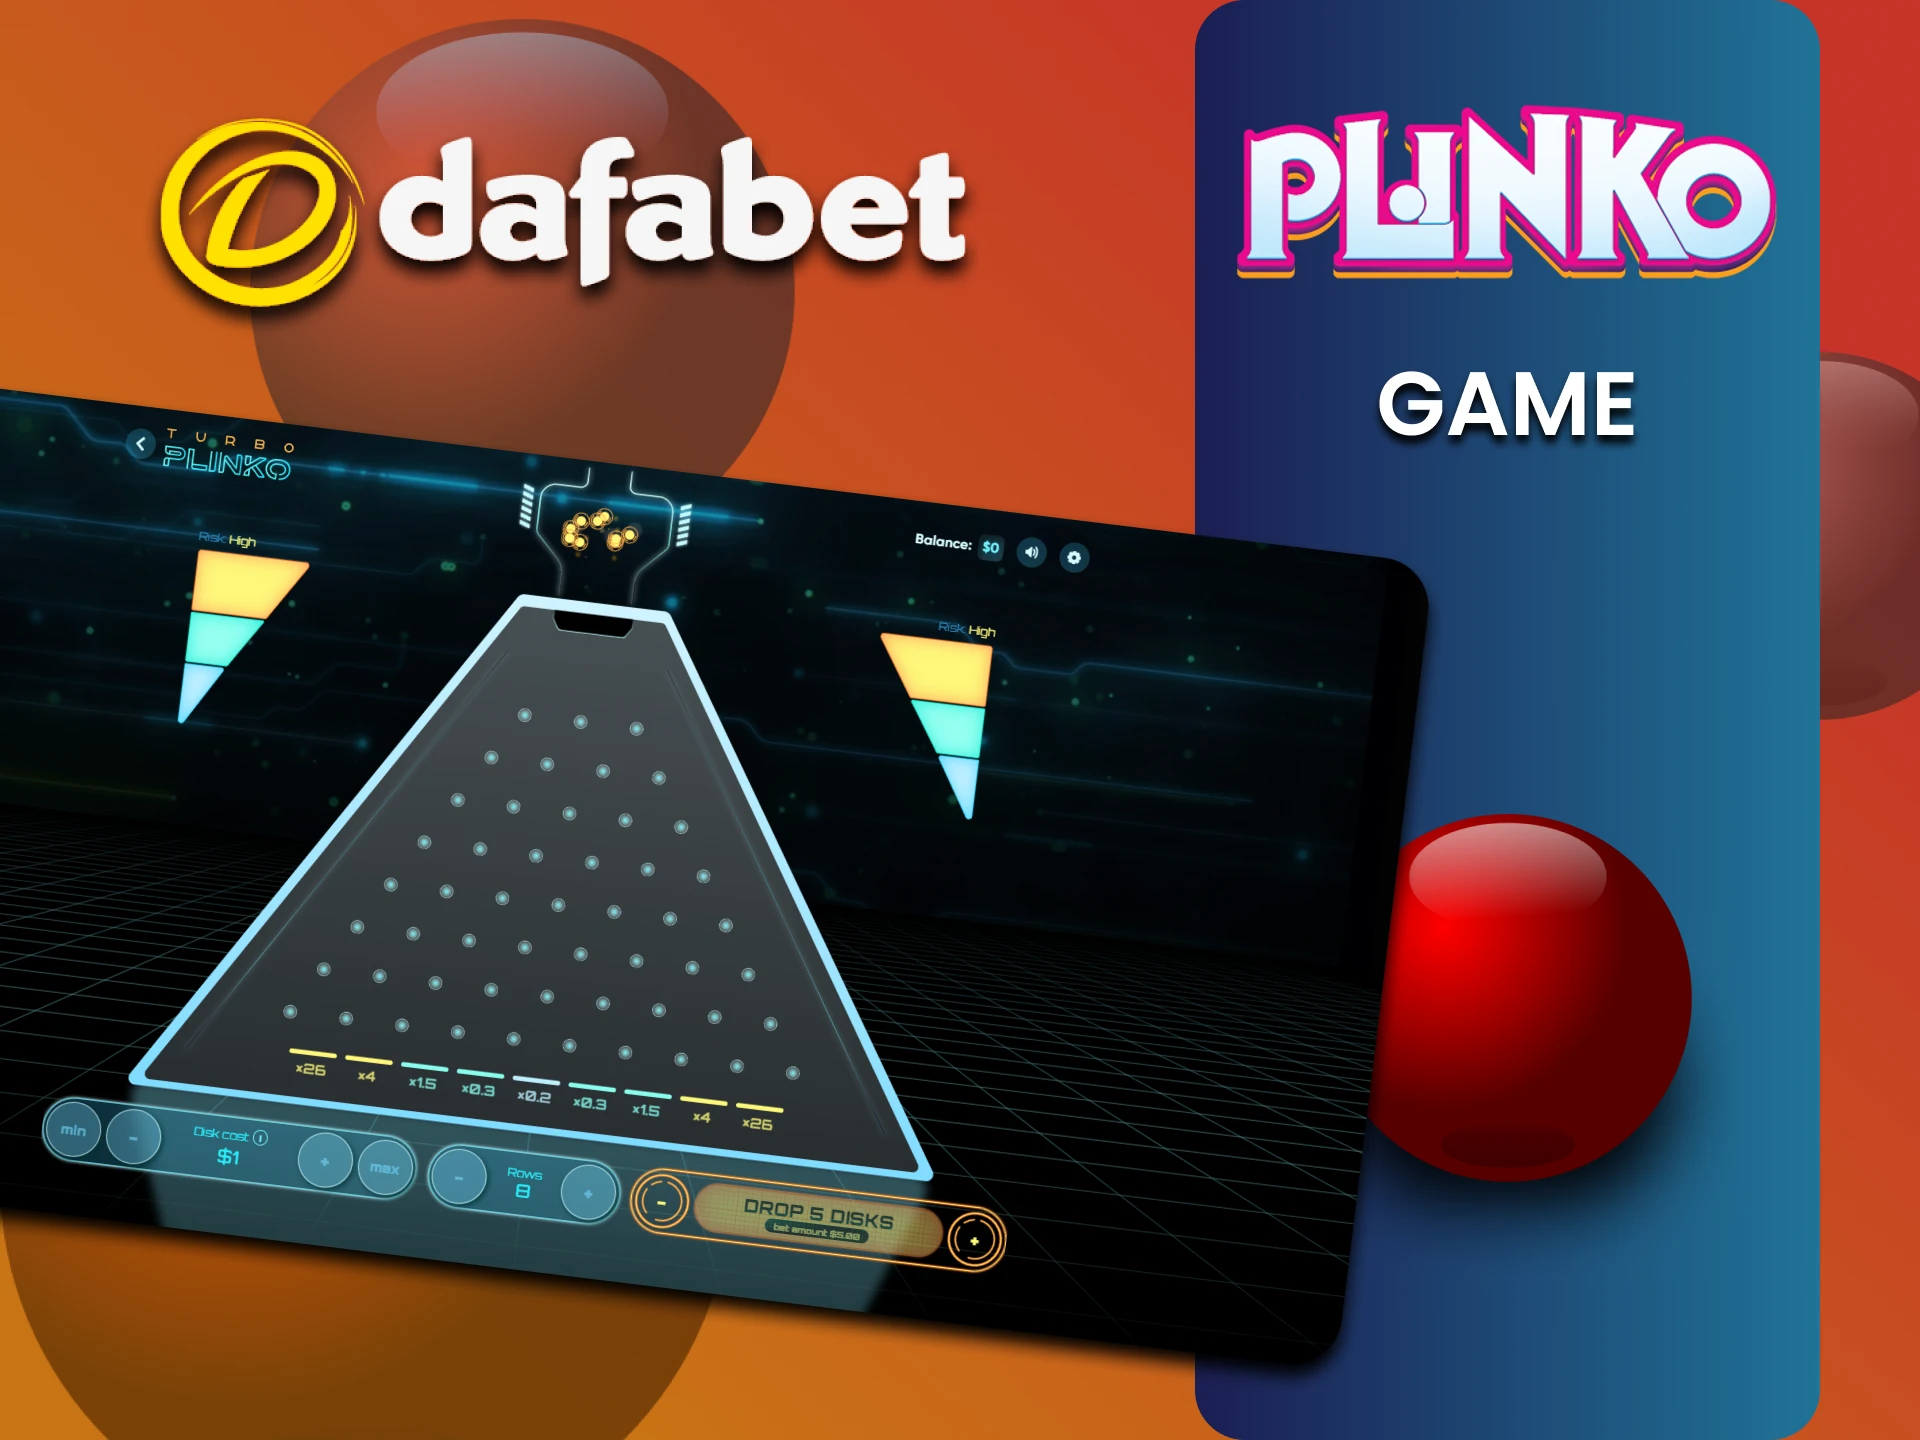 We will talk about the Plinko game on Dafabet.